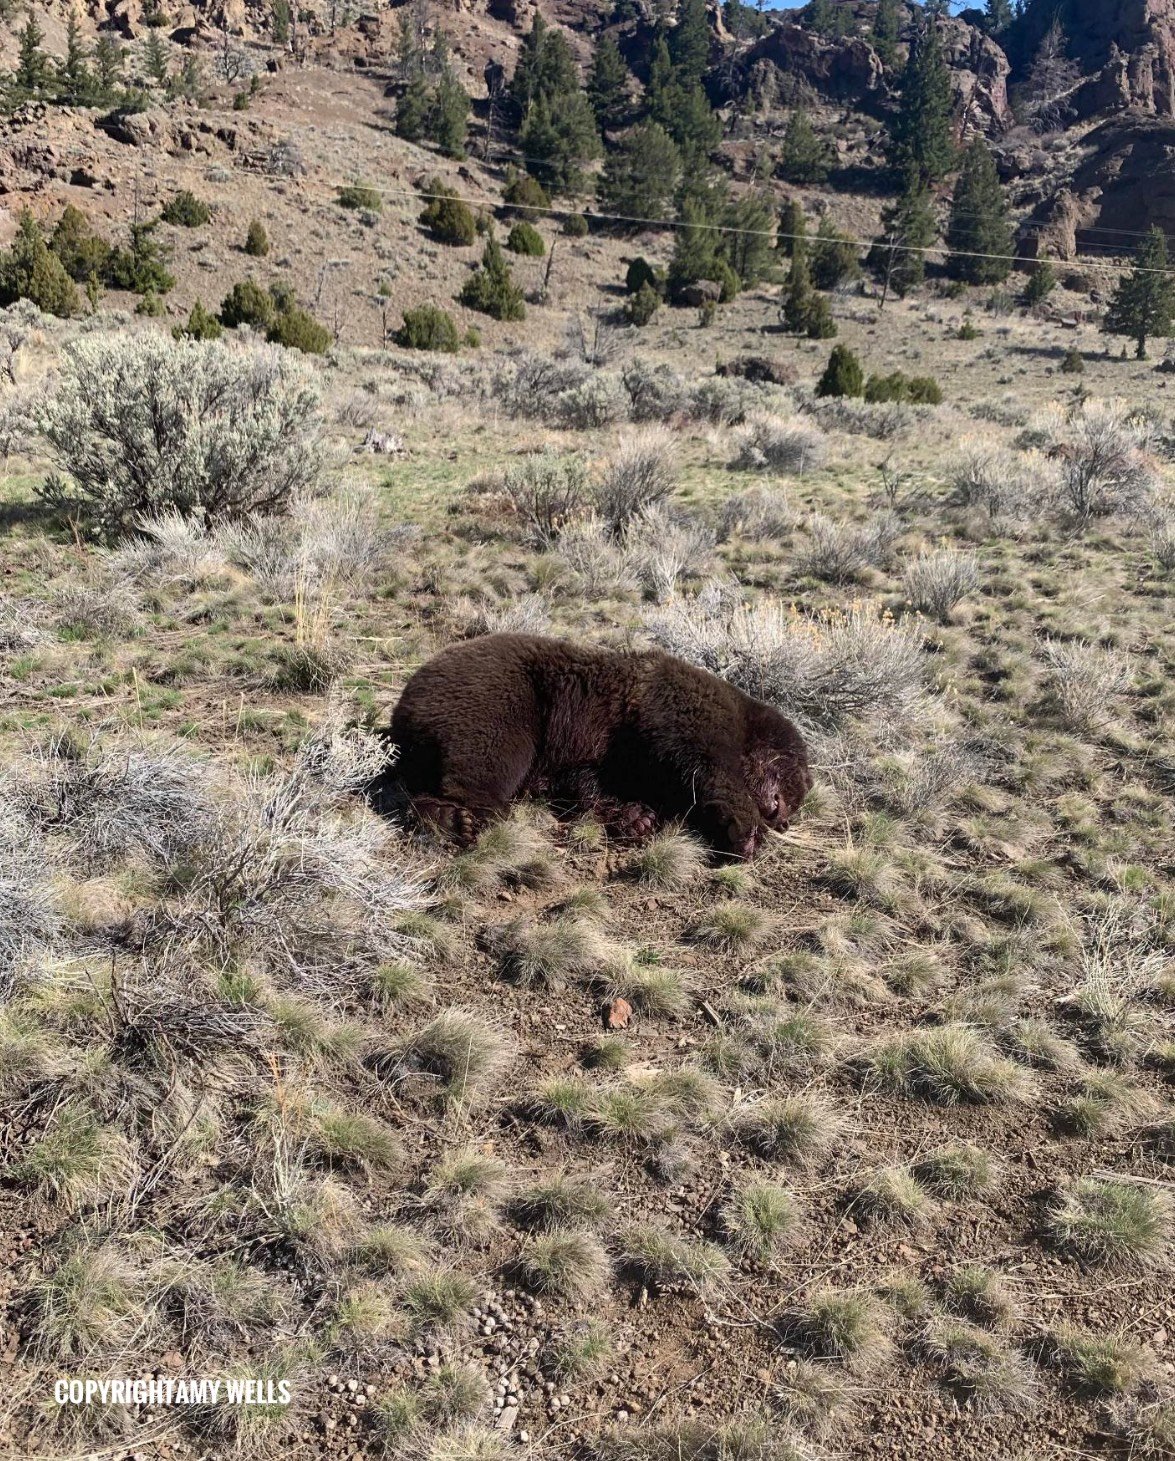 Grizzly Bear Death Near Yellowstone National Park Under Investigation